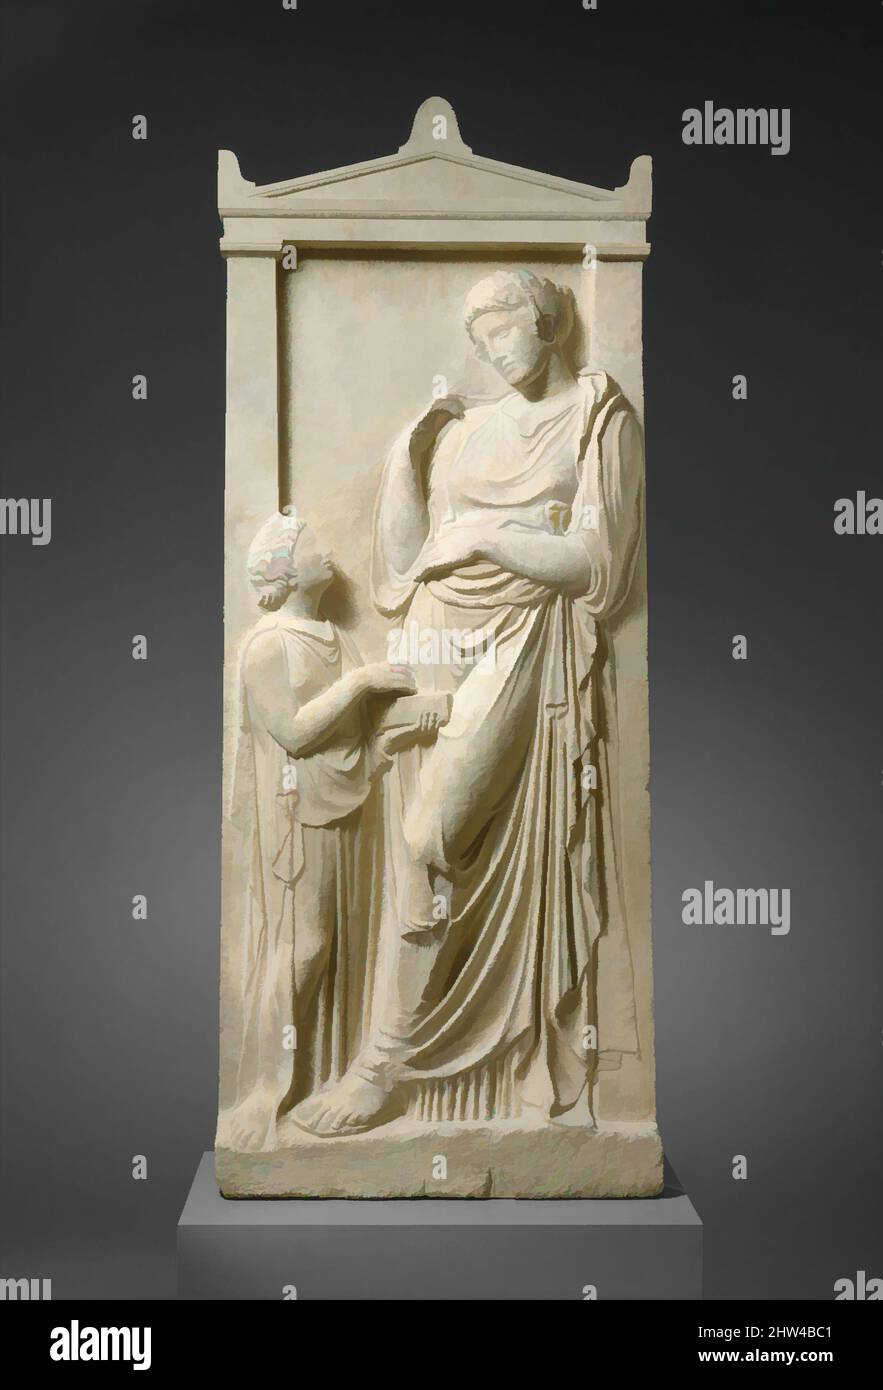 Art inspired by Marble grave stele of a young woman and servant, Classical, ca. 400–390 B.C., Greek, Attic, Marble, Pentelic, H. 70 1/16 in. (178 cm), Stone Sculpture, The young woman leans against the framing pilaster of her grave stele in a pose that may have been inspired by a, Classic works modernized by Artotop with a splash of modernity. Shapes, color and value, eye-catching visual impact on art. Emotions through freedom of artworks in a contemporary way. A timeless message pursuing a wildly creative new direction. Artists turning to the digital medium and creating the Artotop NFT Stock Photo